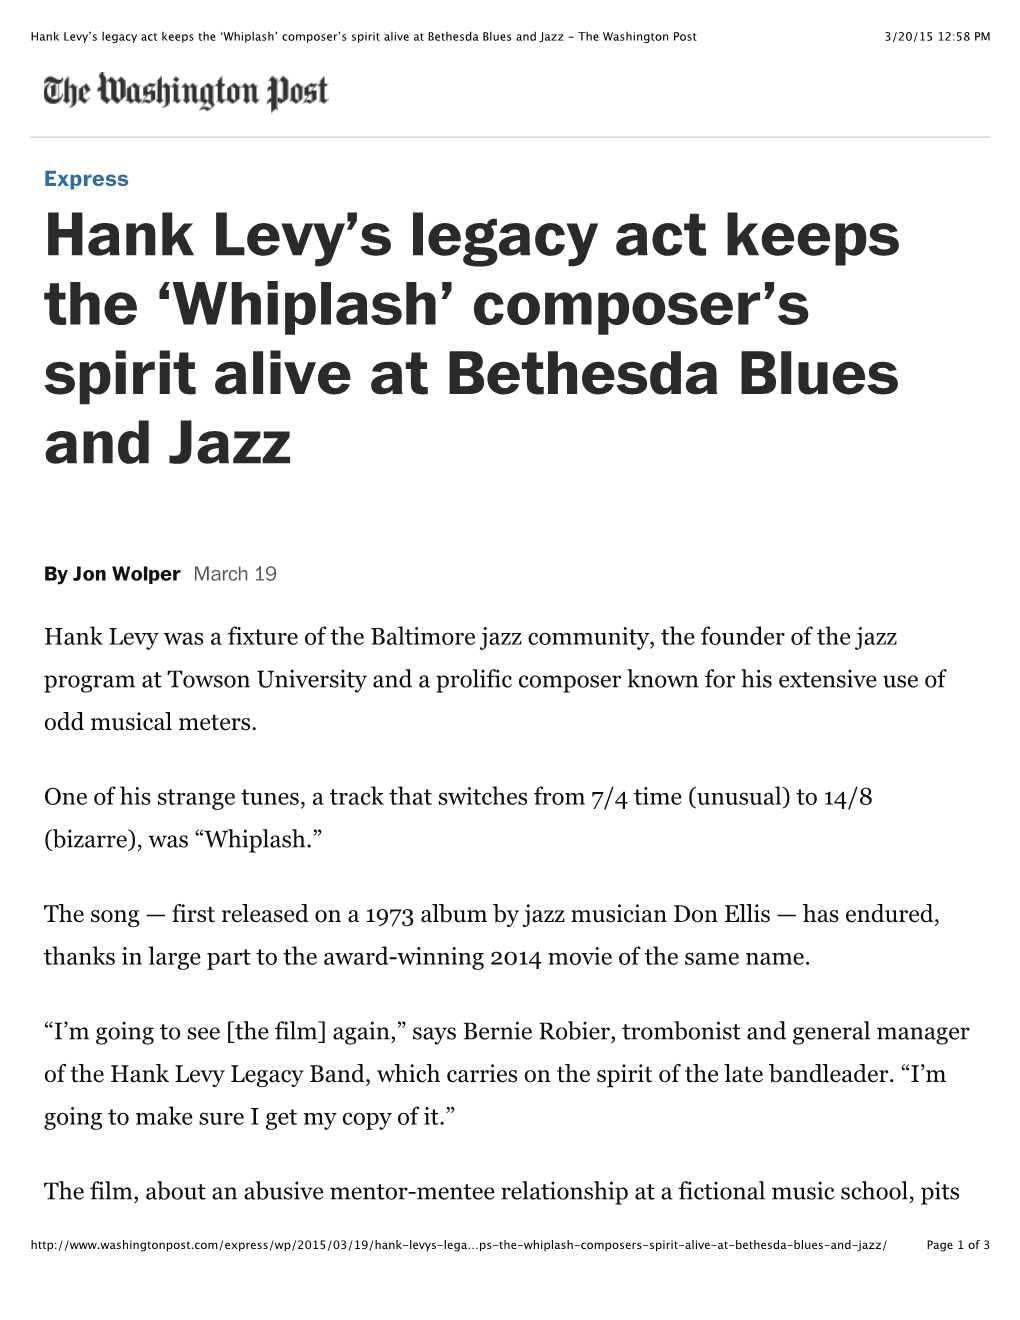 Hank Levy's Legacy Act Keeps the 'Whiplash' Composer's Spirit Alive At